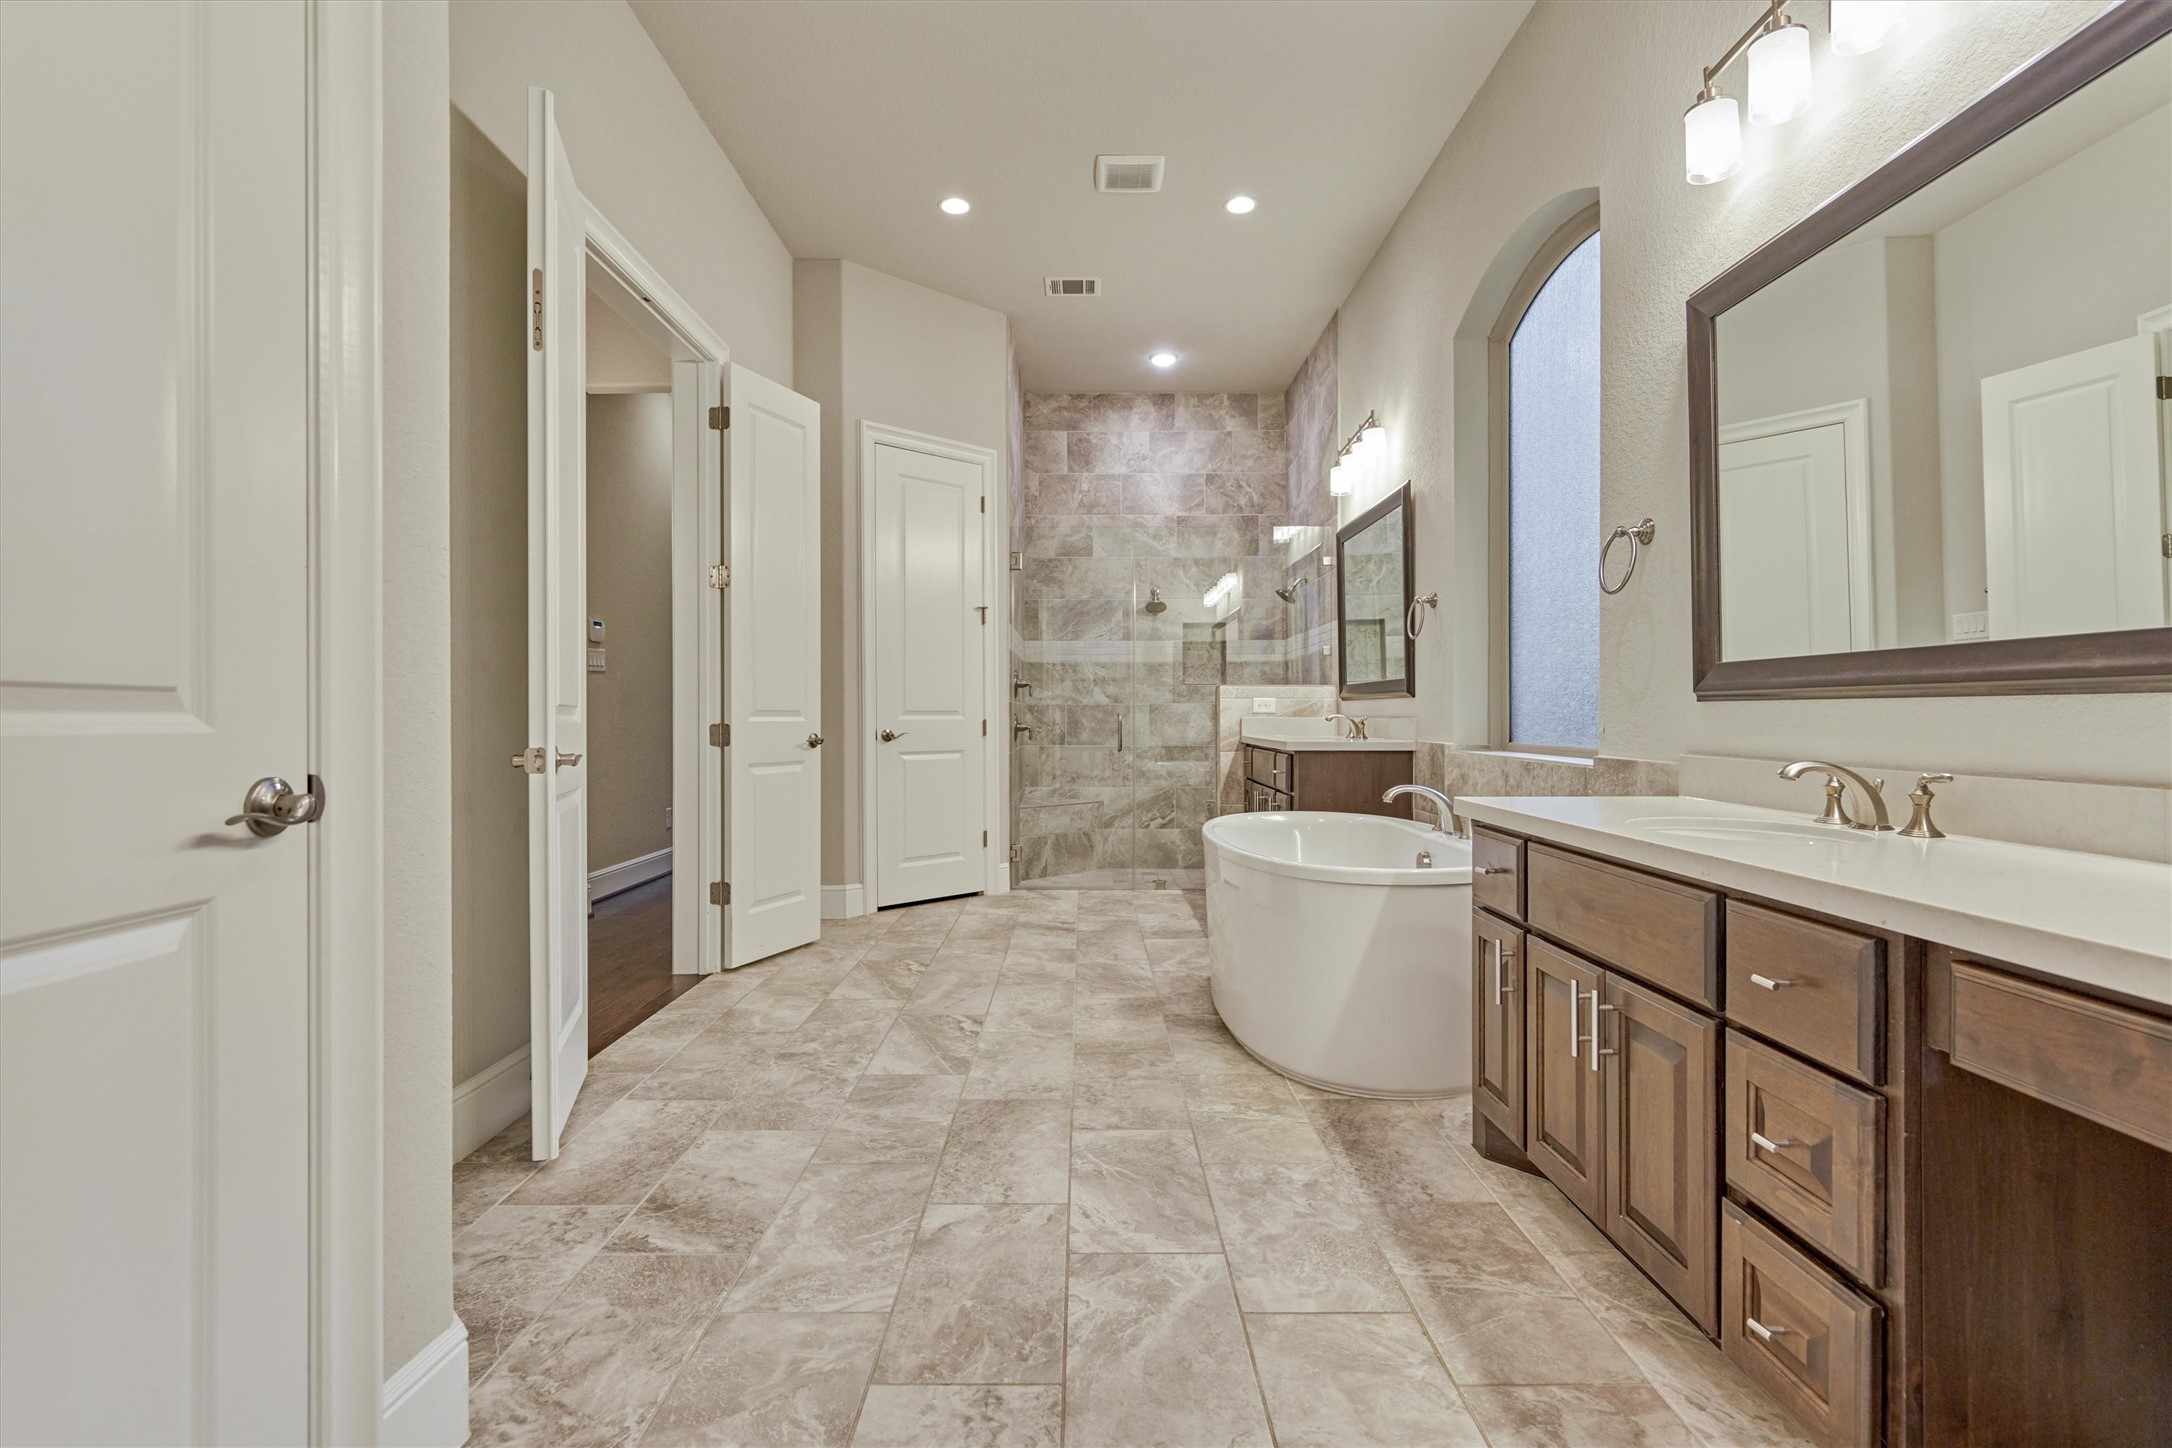 This spacious bathroom provides plenty of room for sharing.
